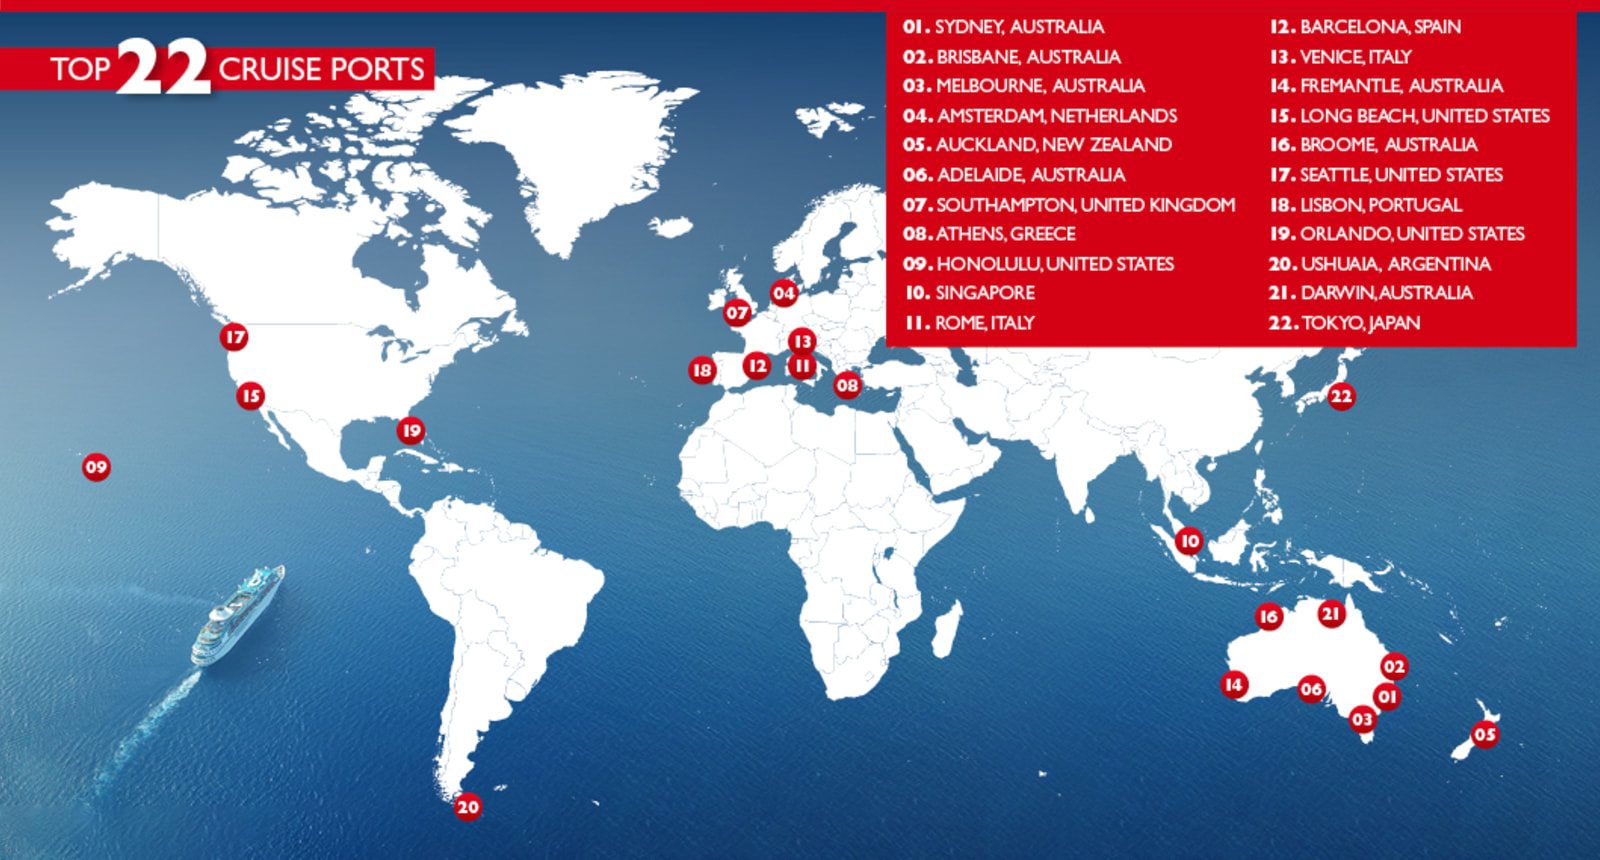 World map with our top 22 cruise ports marked and listed on the map